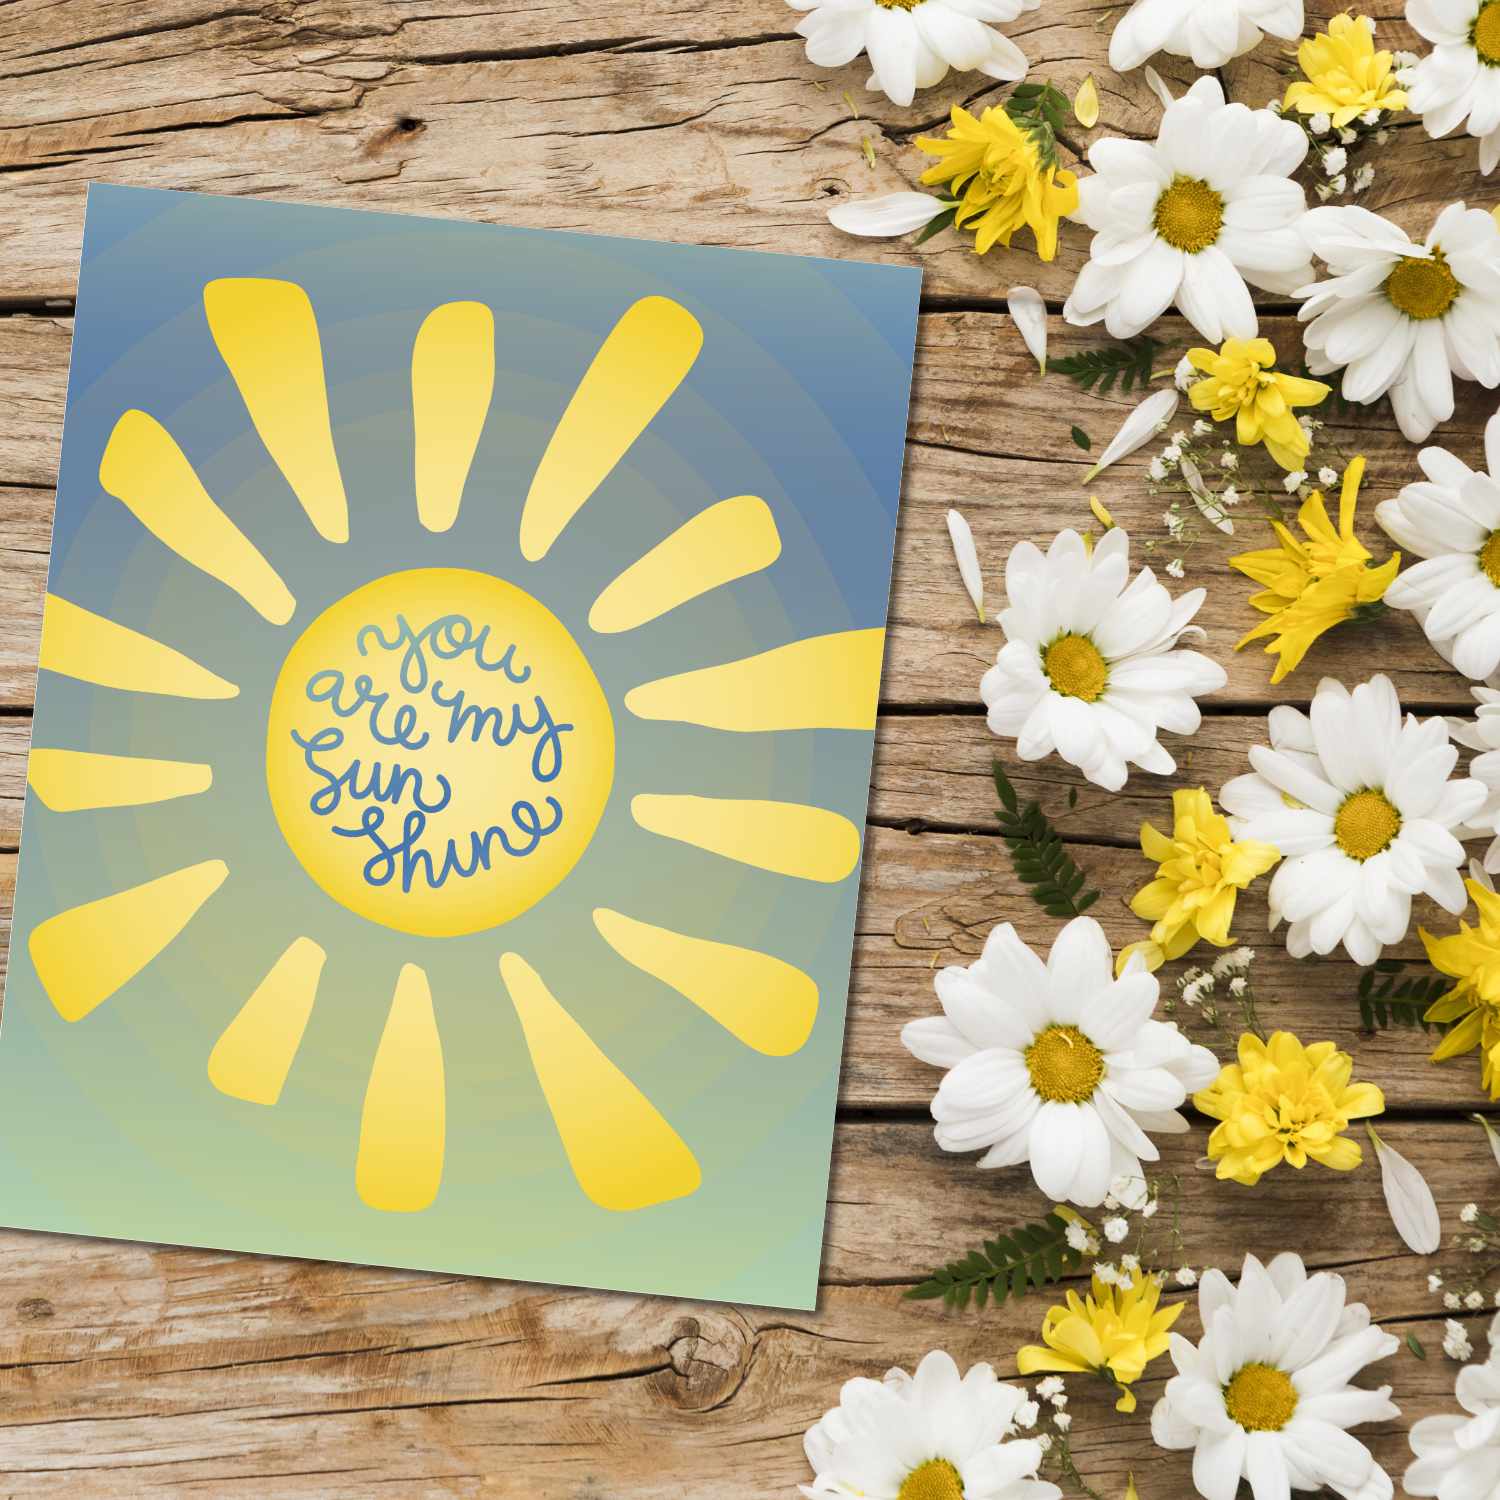 You are My Sunshine - Song Lyric Poster Art Kids Playroom Song Lyrics Art Song Lyrics Art 8x10 Unframed Print 